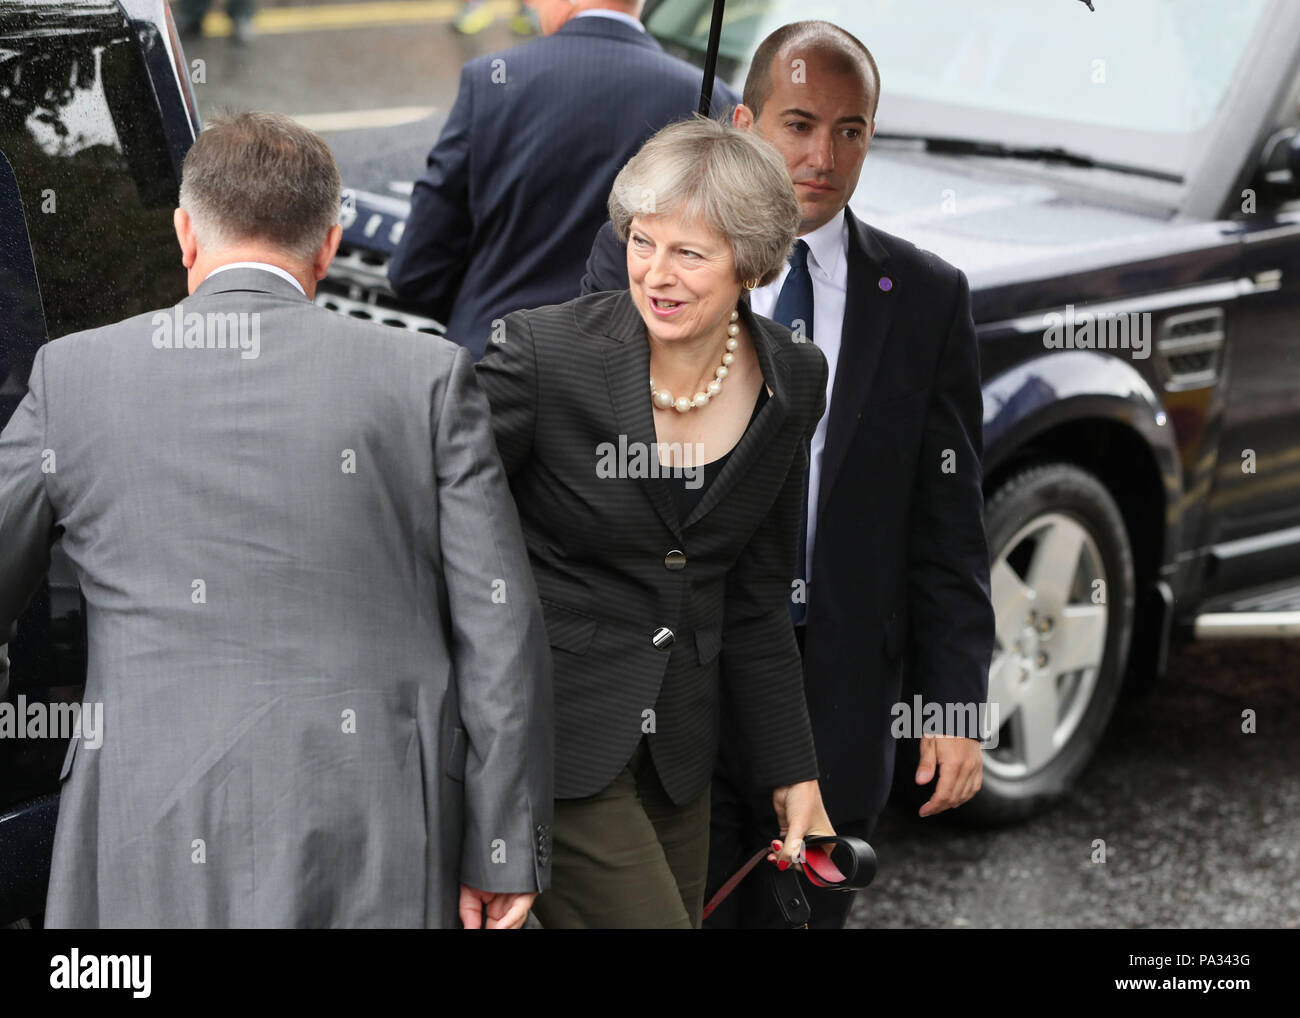 Prime Minister Theresa May arrives at the Crescent Arts Centre in Belfast ahead of a speech in the city where she will reiterate her refusal to contemplate any backstop deal that treats Northern Ireland differently from the rest of the UK. Stock Photo